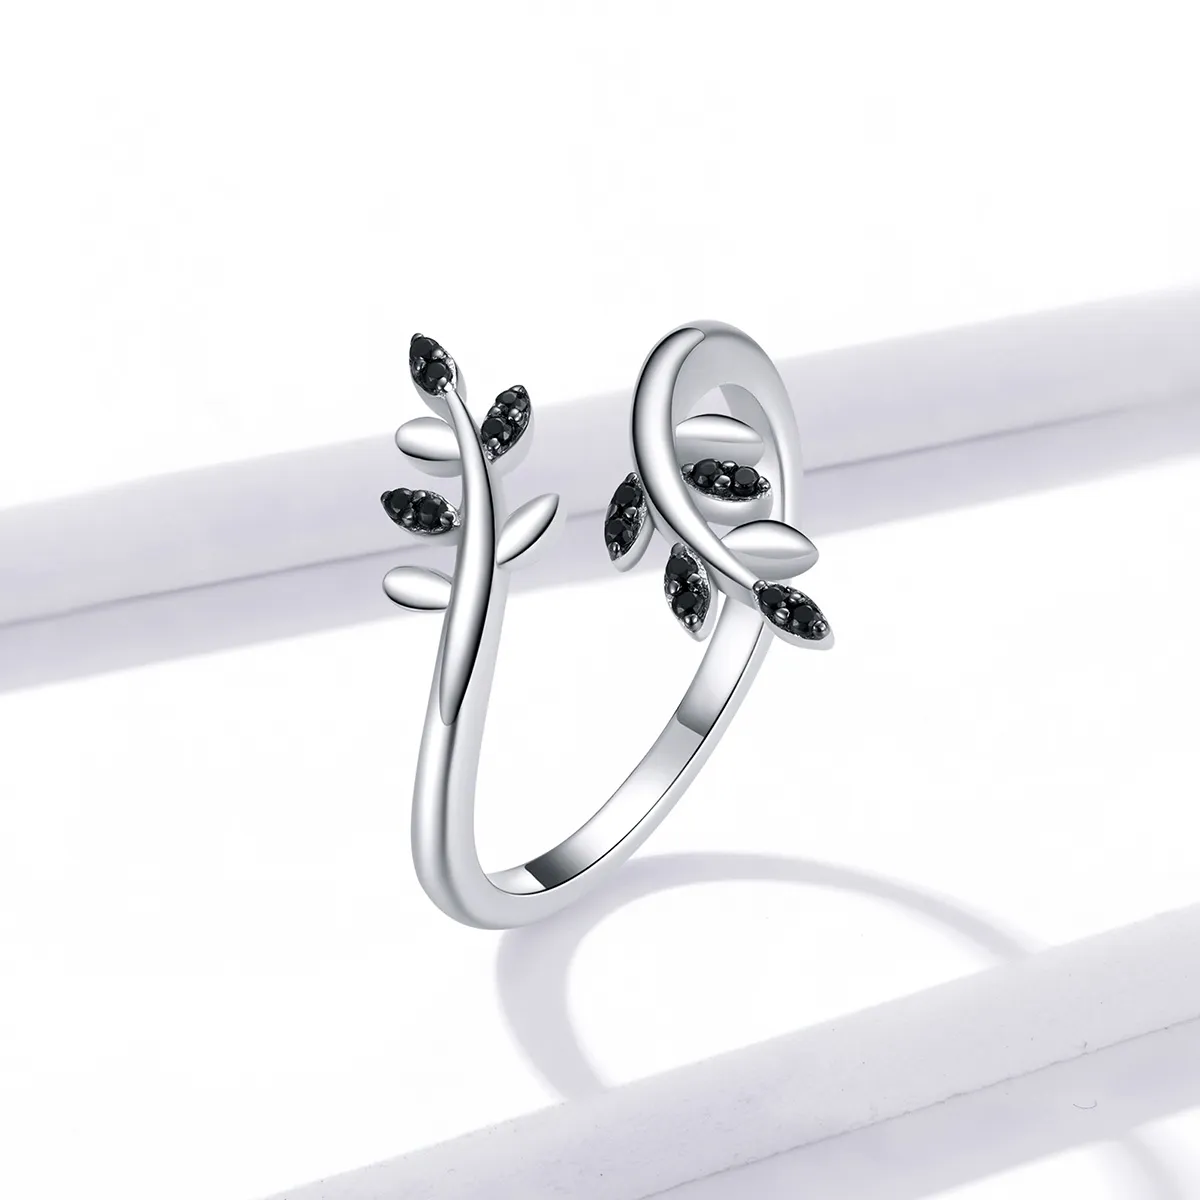 Pandora Style Silver Tree Branch Open Ring - BSR129